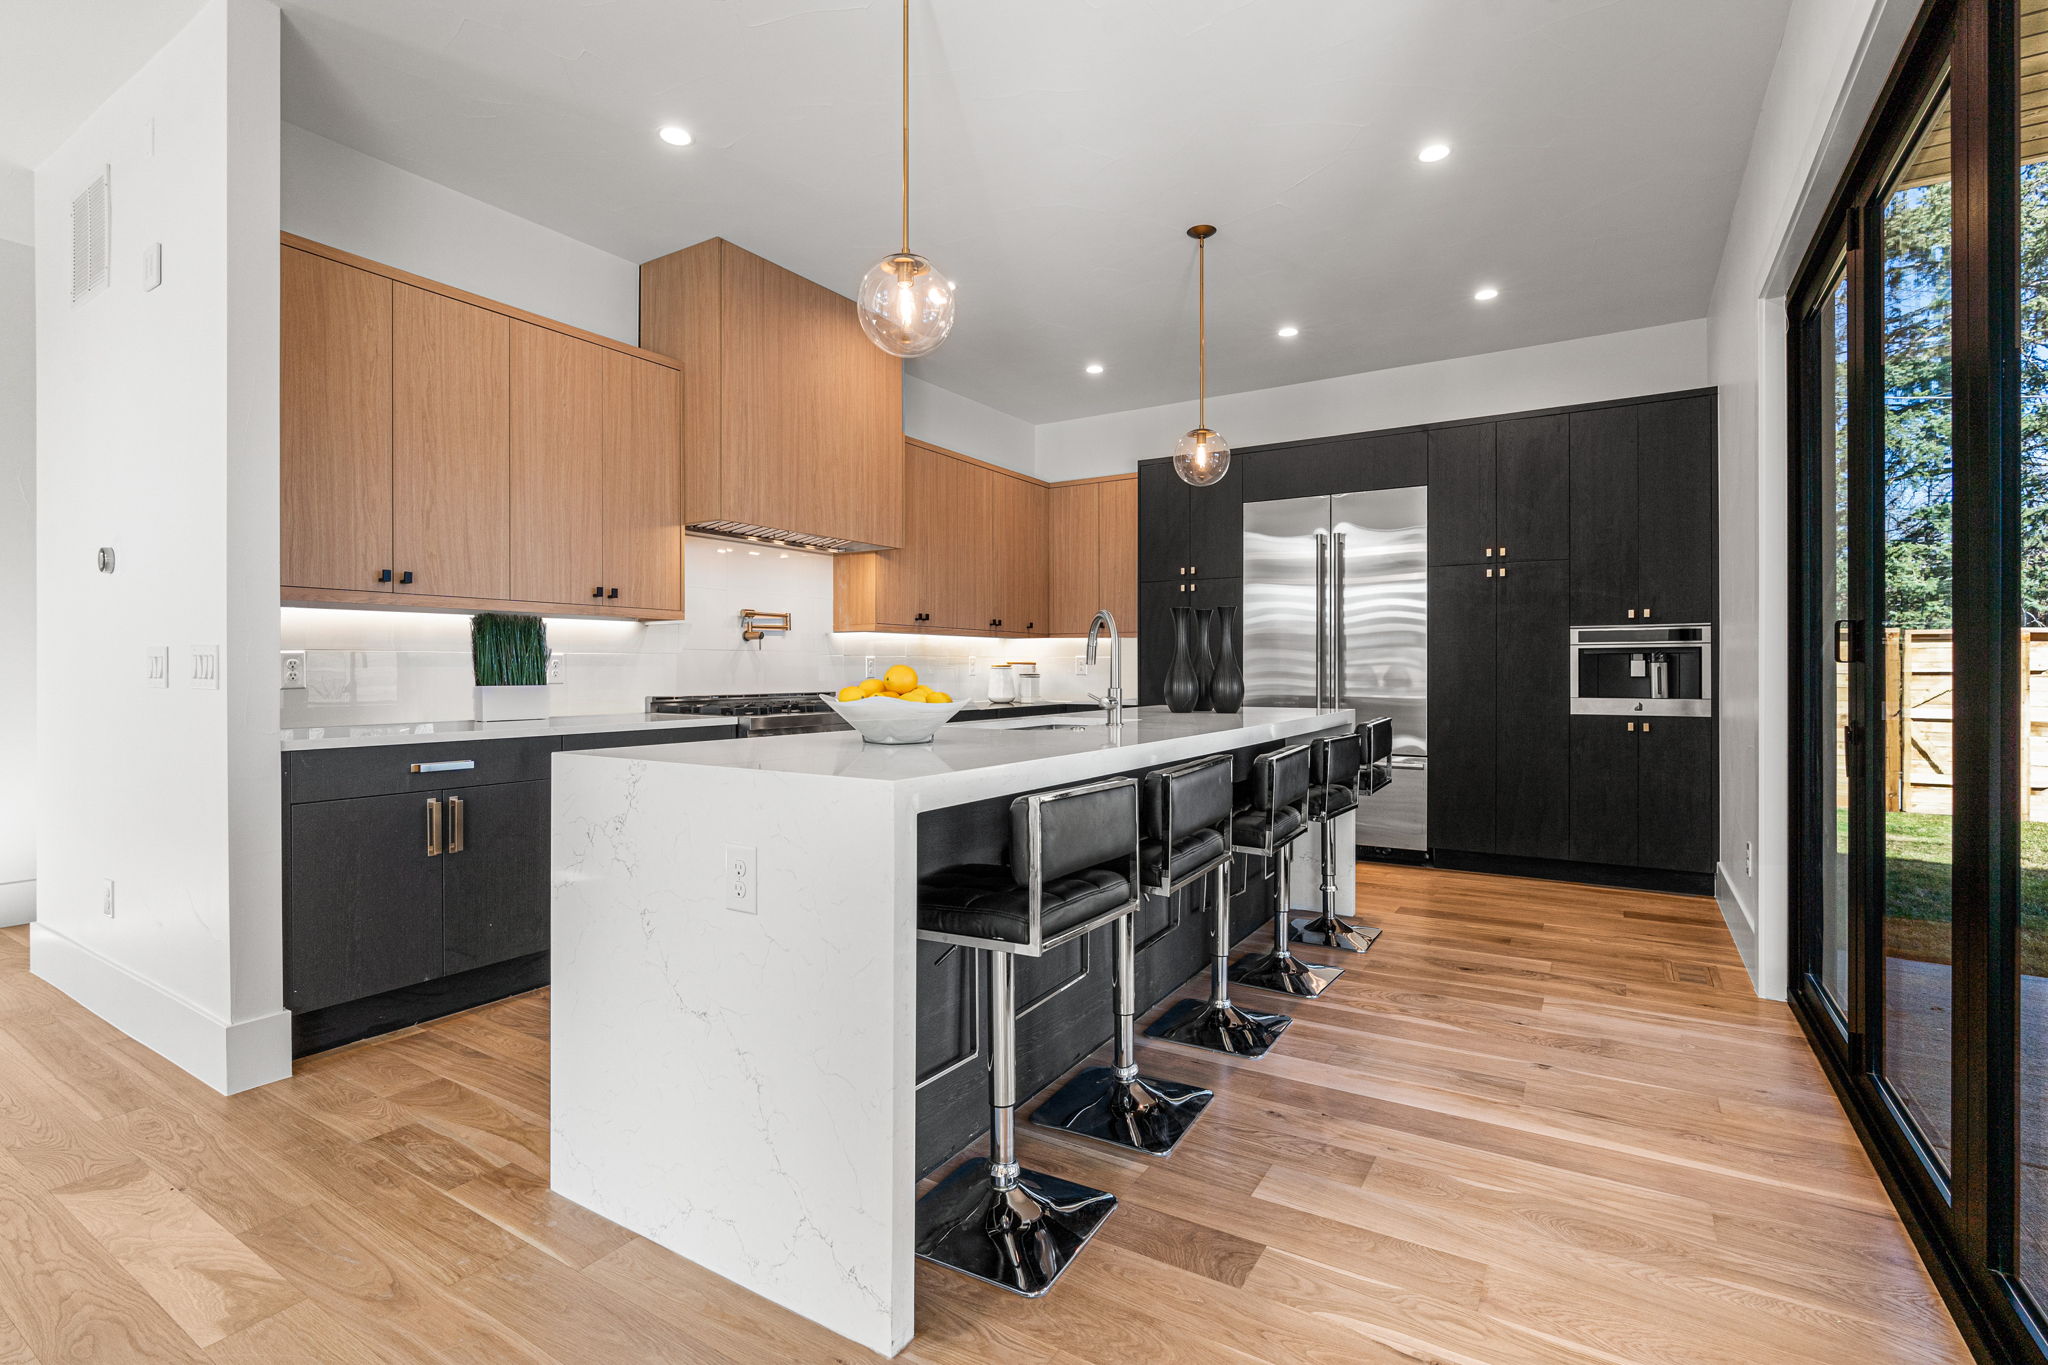 The chef-inspired kitchen showcases flat panel soft-close cabinets with under cabinet lighting, oversized eat-in island,, and top of the line appliances - including built-in espresso machine & pot filler.